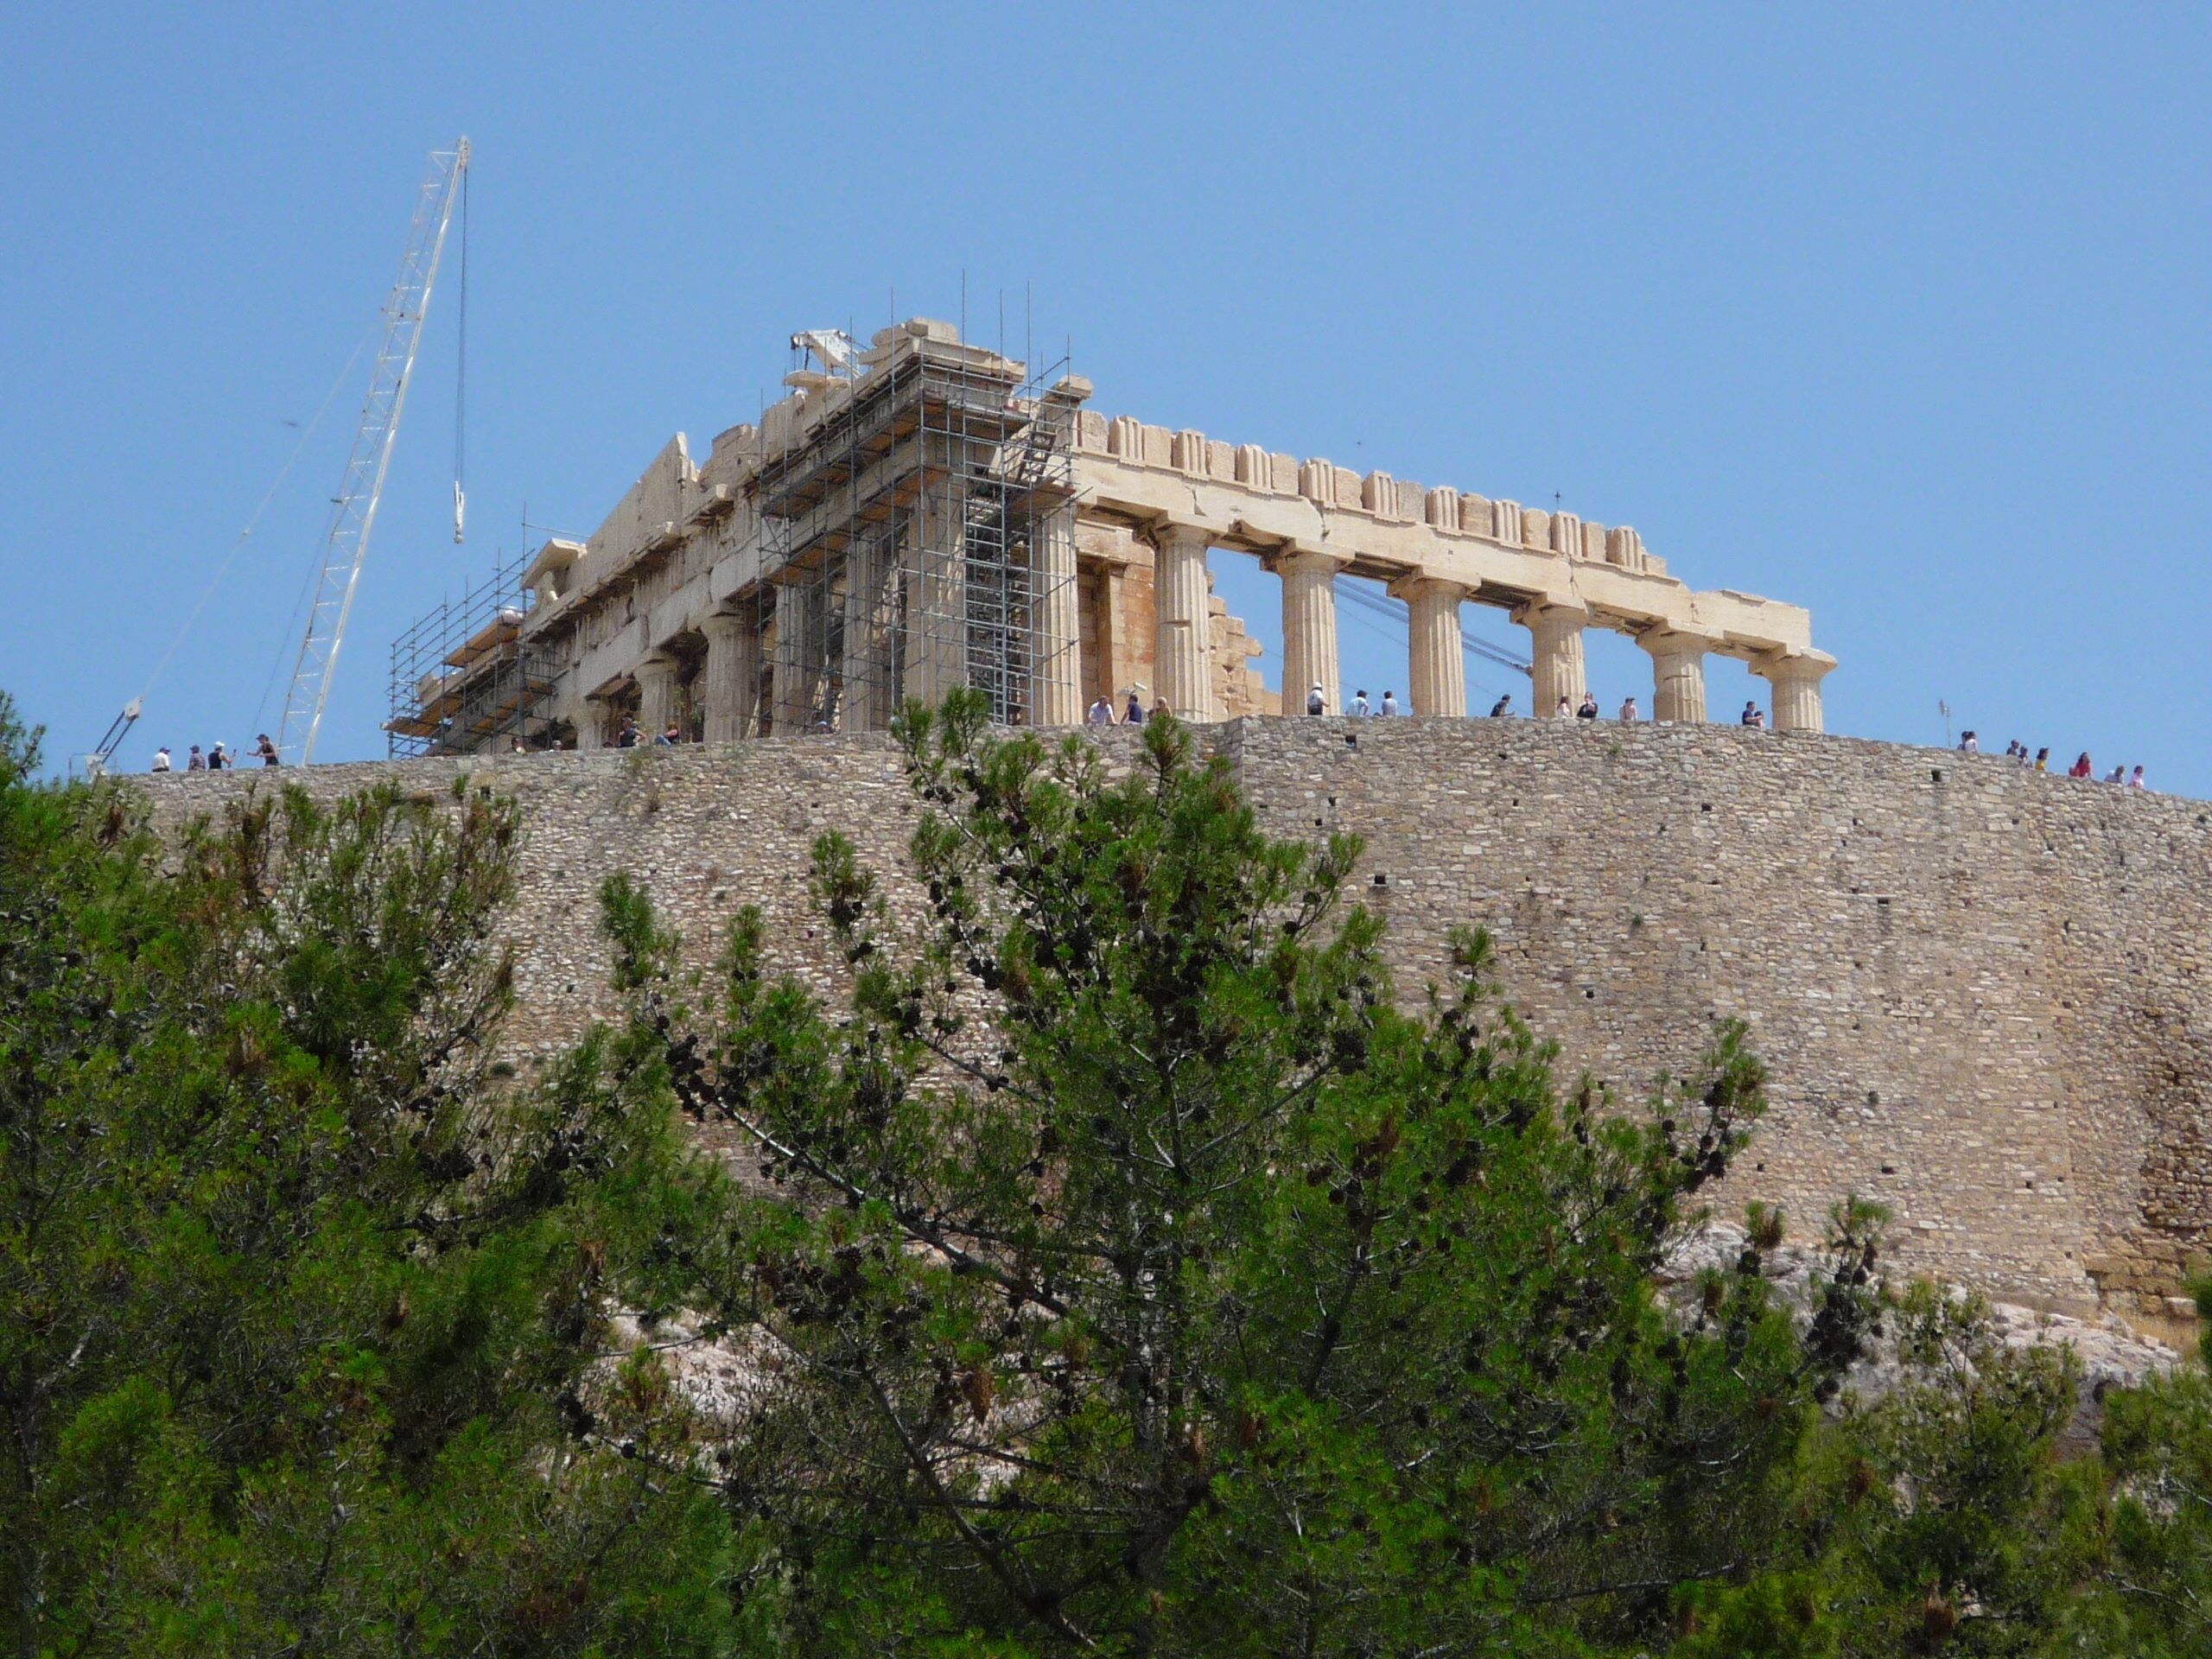 File:Ancient Greek architecture reconstruction.jpg - Wikimedia Commons